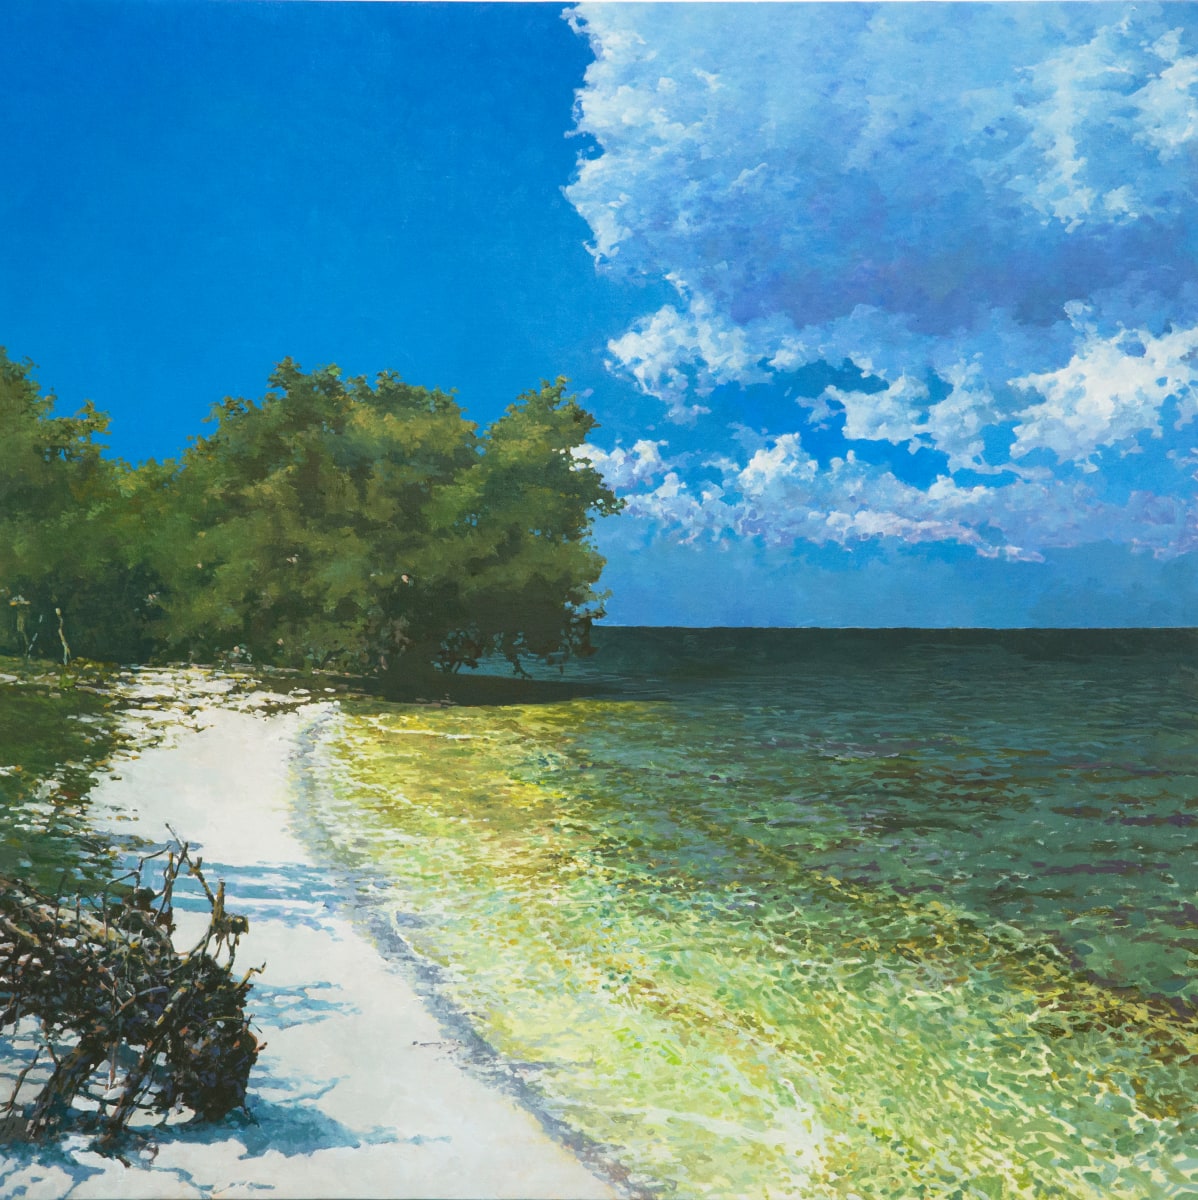 Bay Beach by Bruce Marsh  Image: Seascape in 4 quadrants. This was a proposal for a large painting for a med group in Naples FL. Painted, but I lost the photo of the bigger one.

